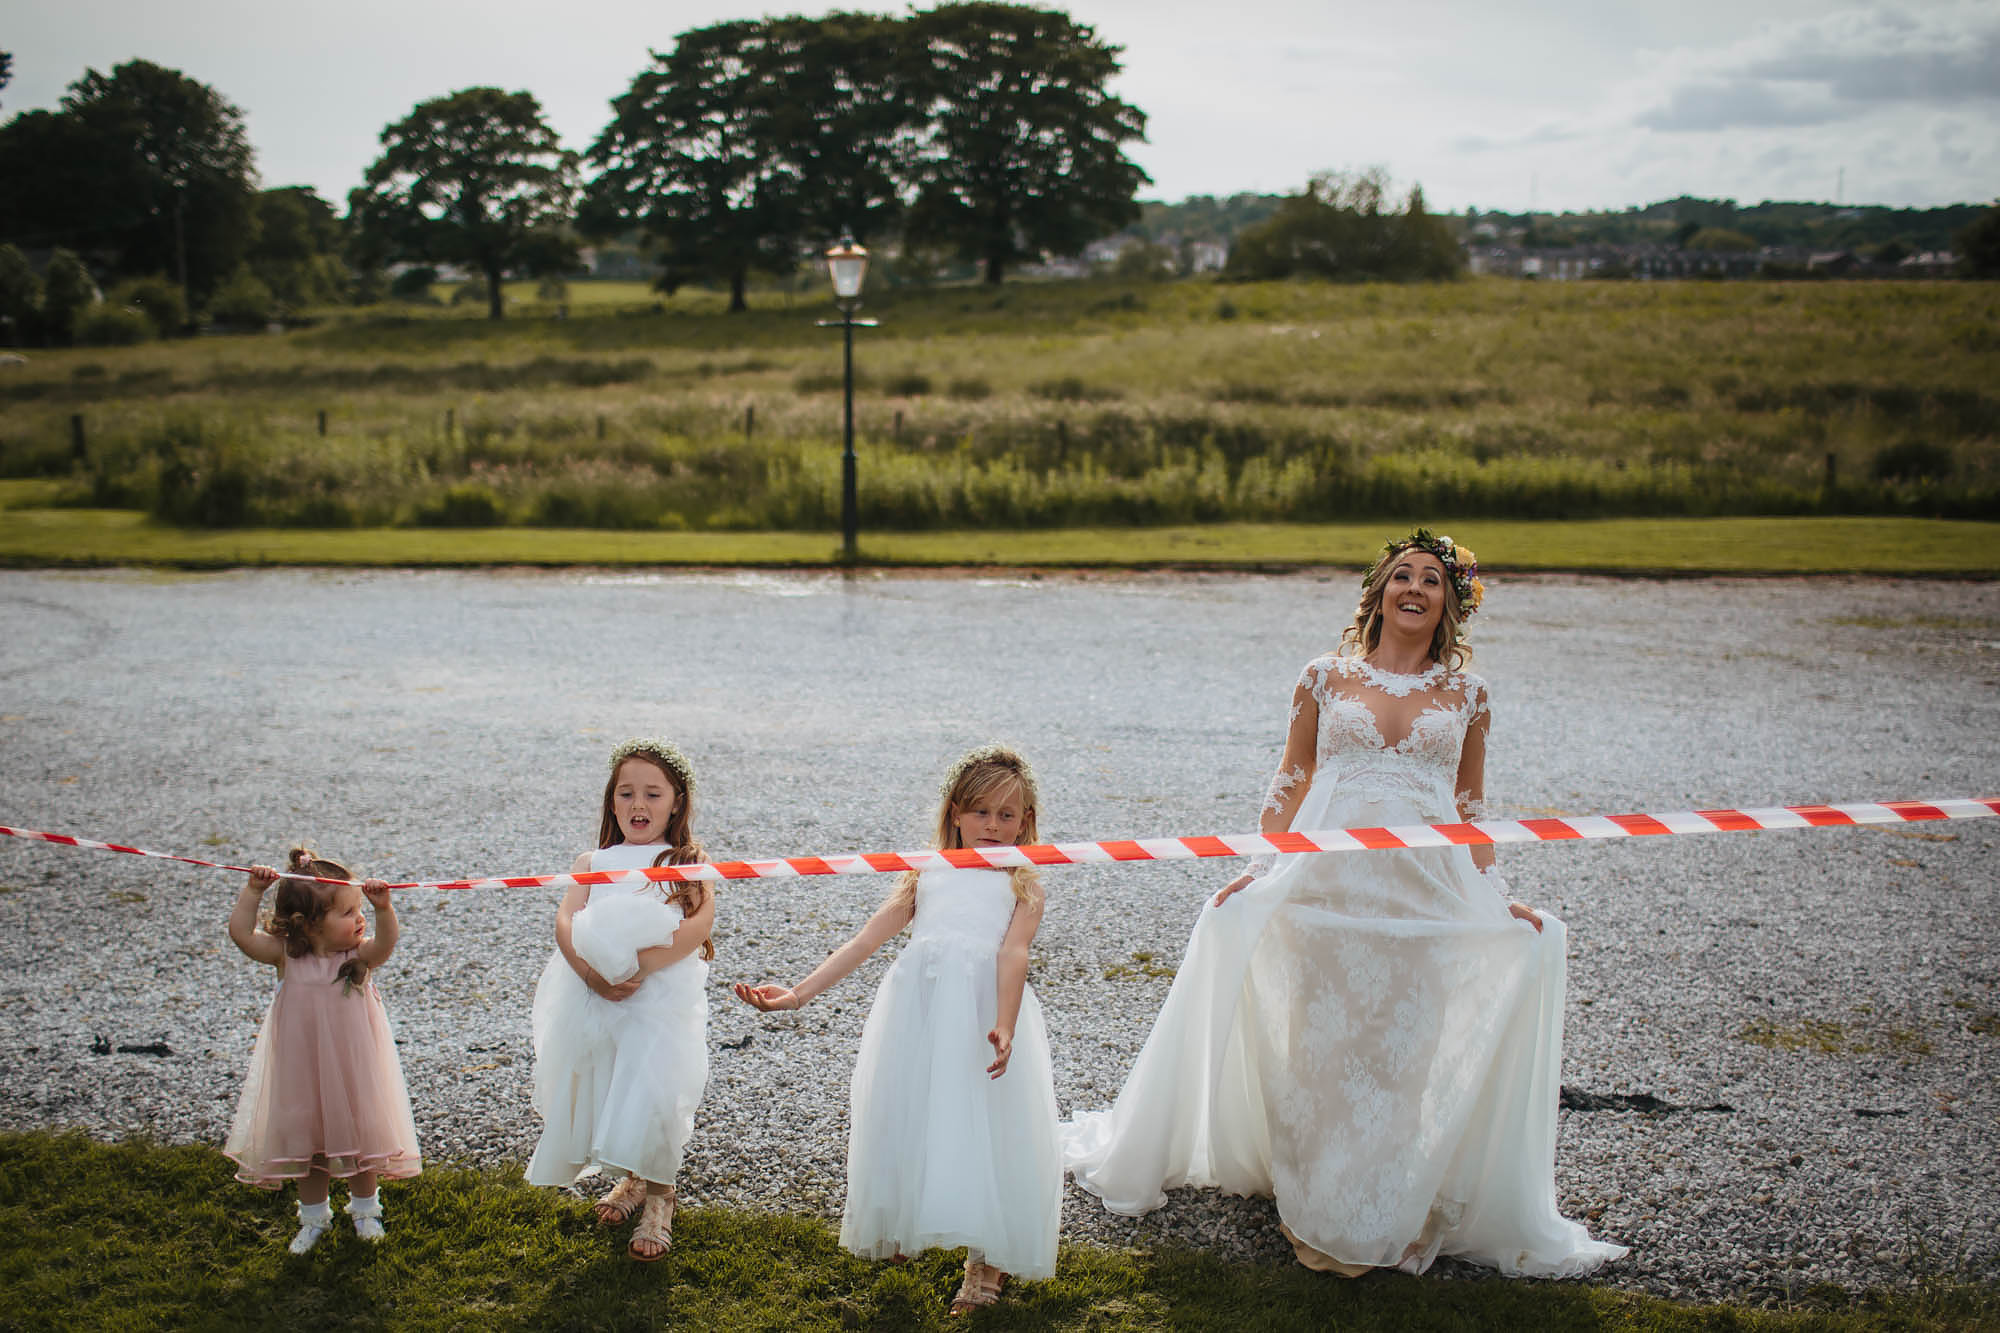 Bride and bridesmaids limbo under red tape at a wedding